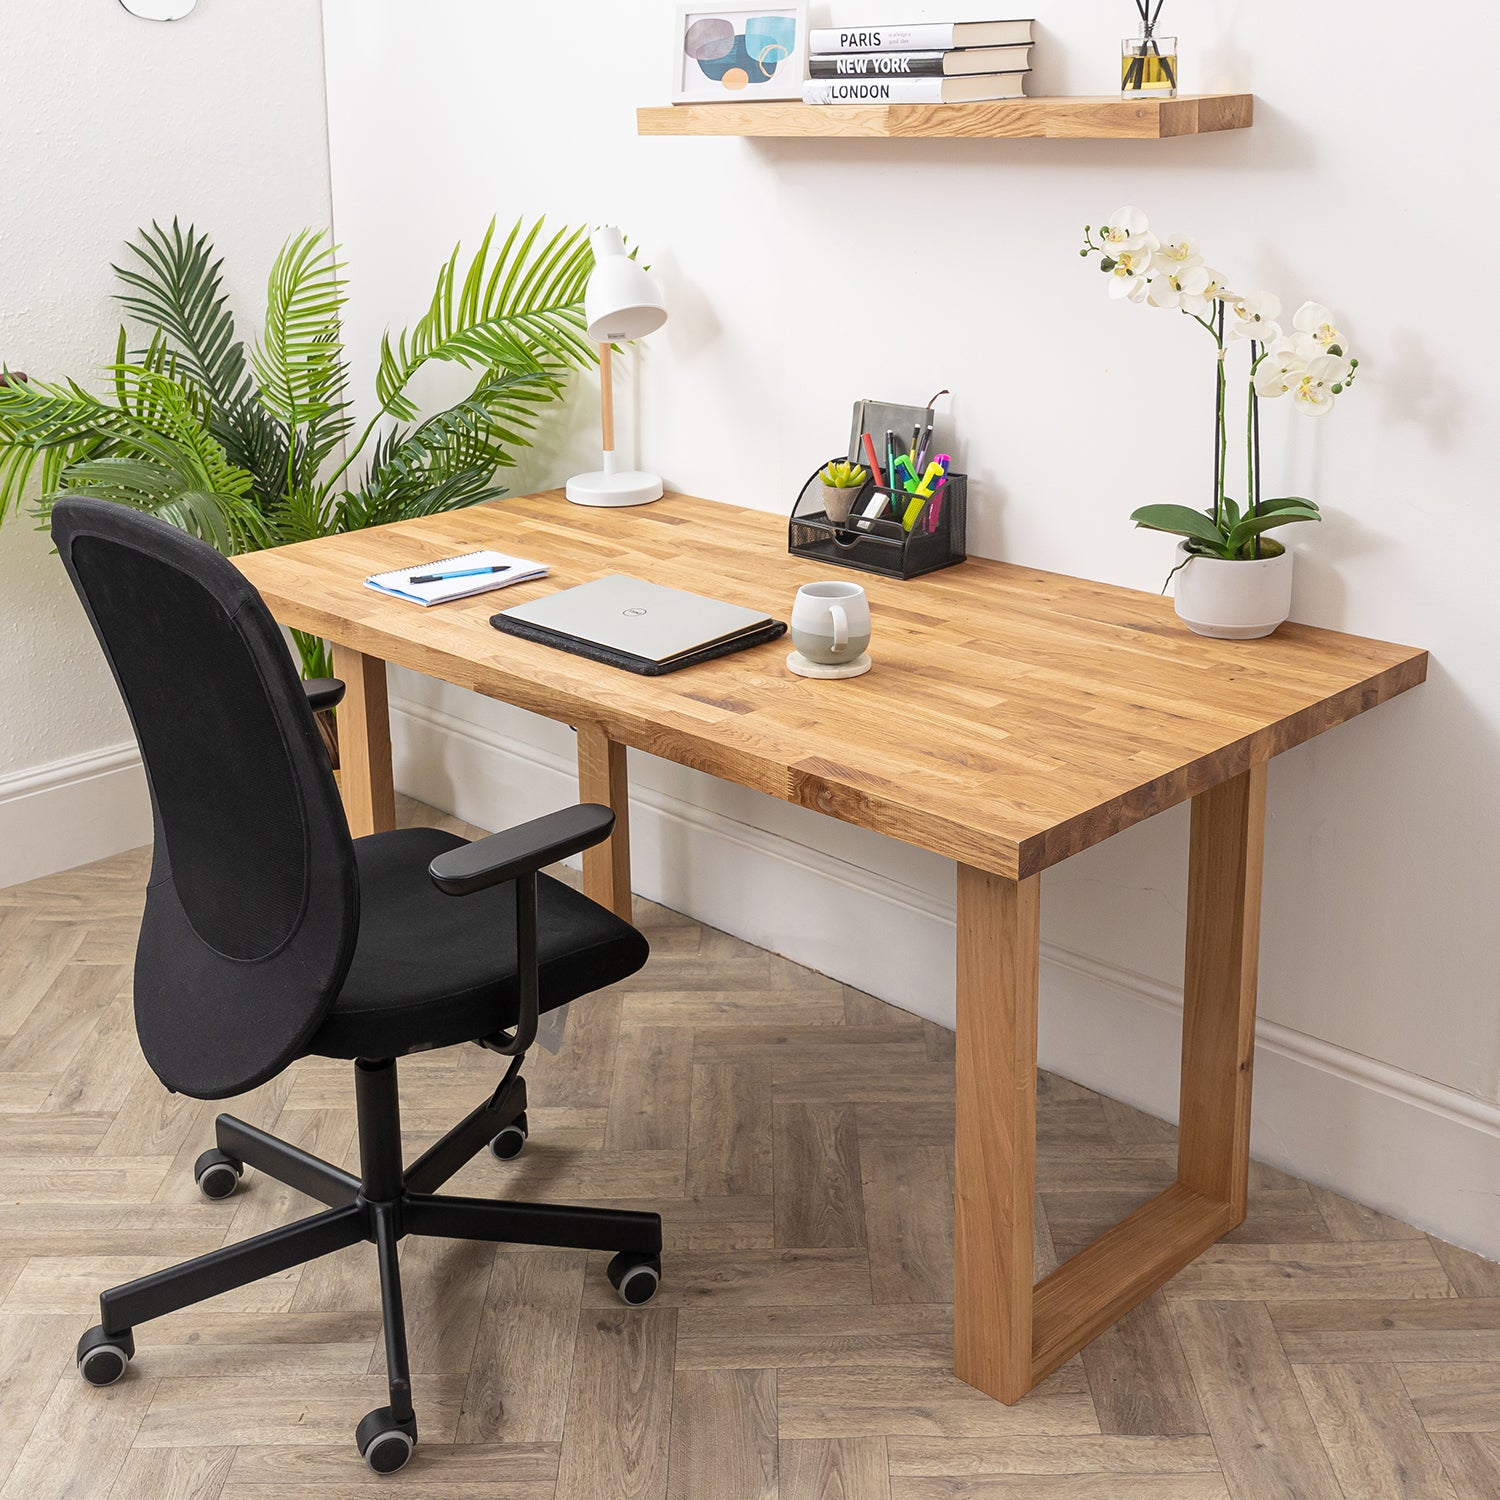 Oak Solid Wood Desk with Wooden Square Legs - 40mm thick desktop